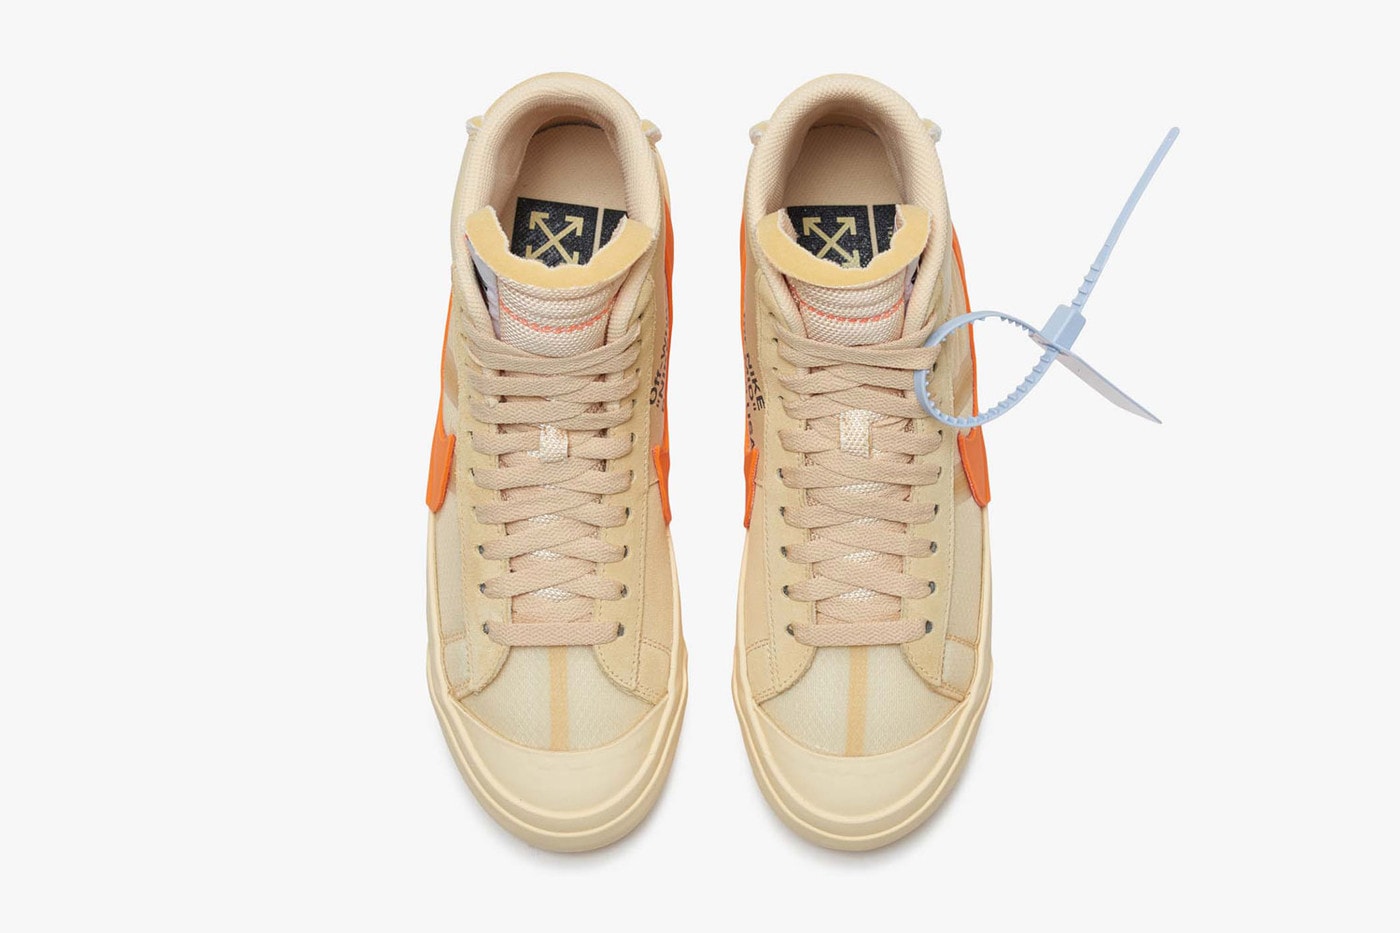 Off-White™ x Nike Blazer "Spooky Pack" Virgil Abloh Official Images